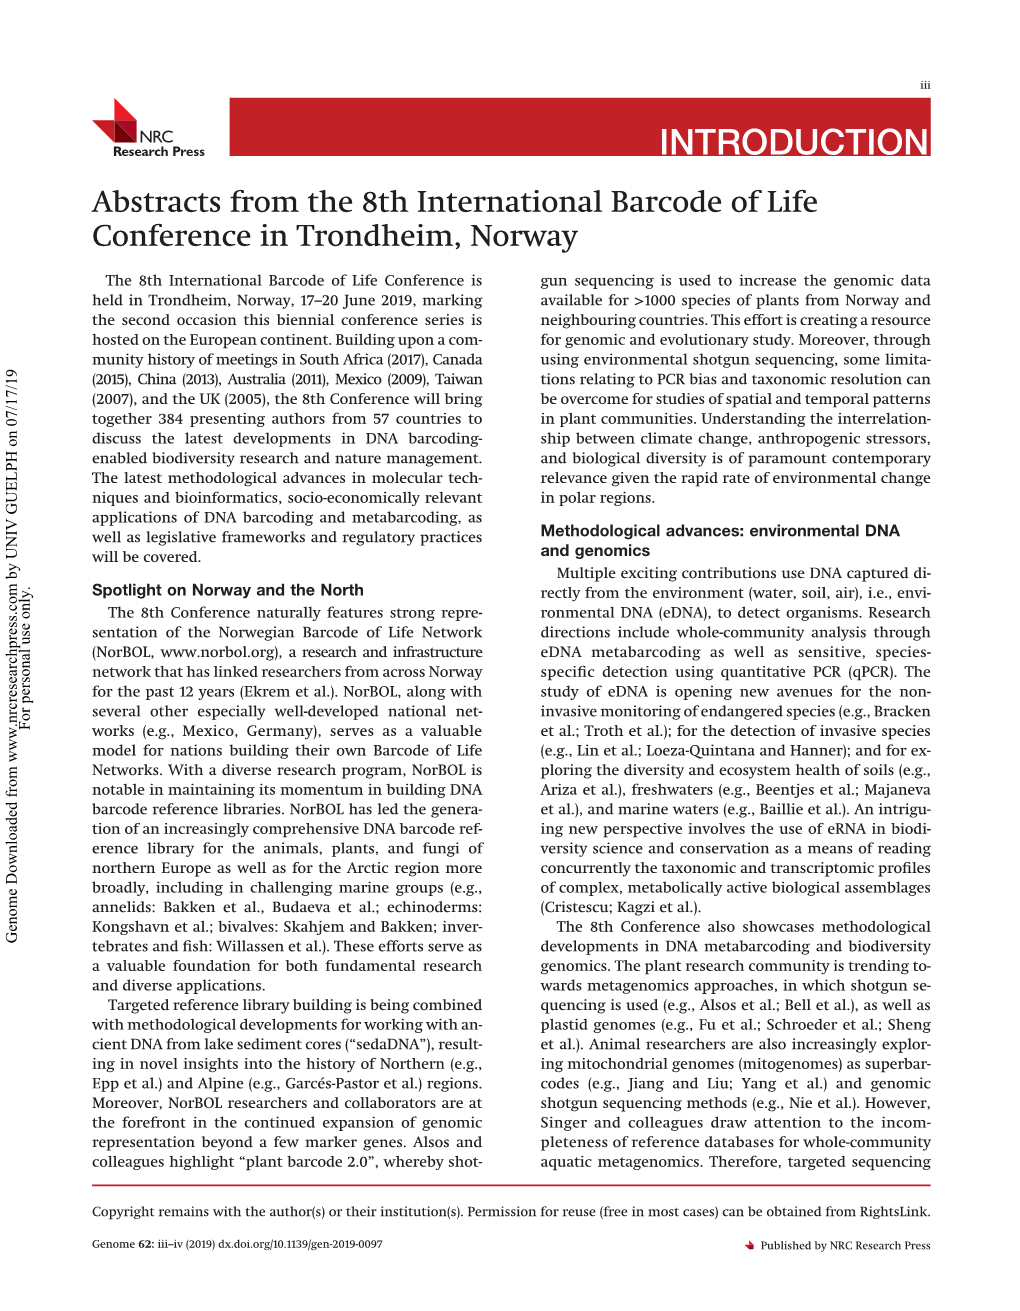 INTRODUCTION Abstracts from the 8Th International Barcode of Life Conference in Trondheim, Norway